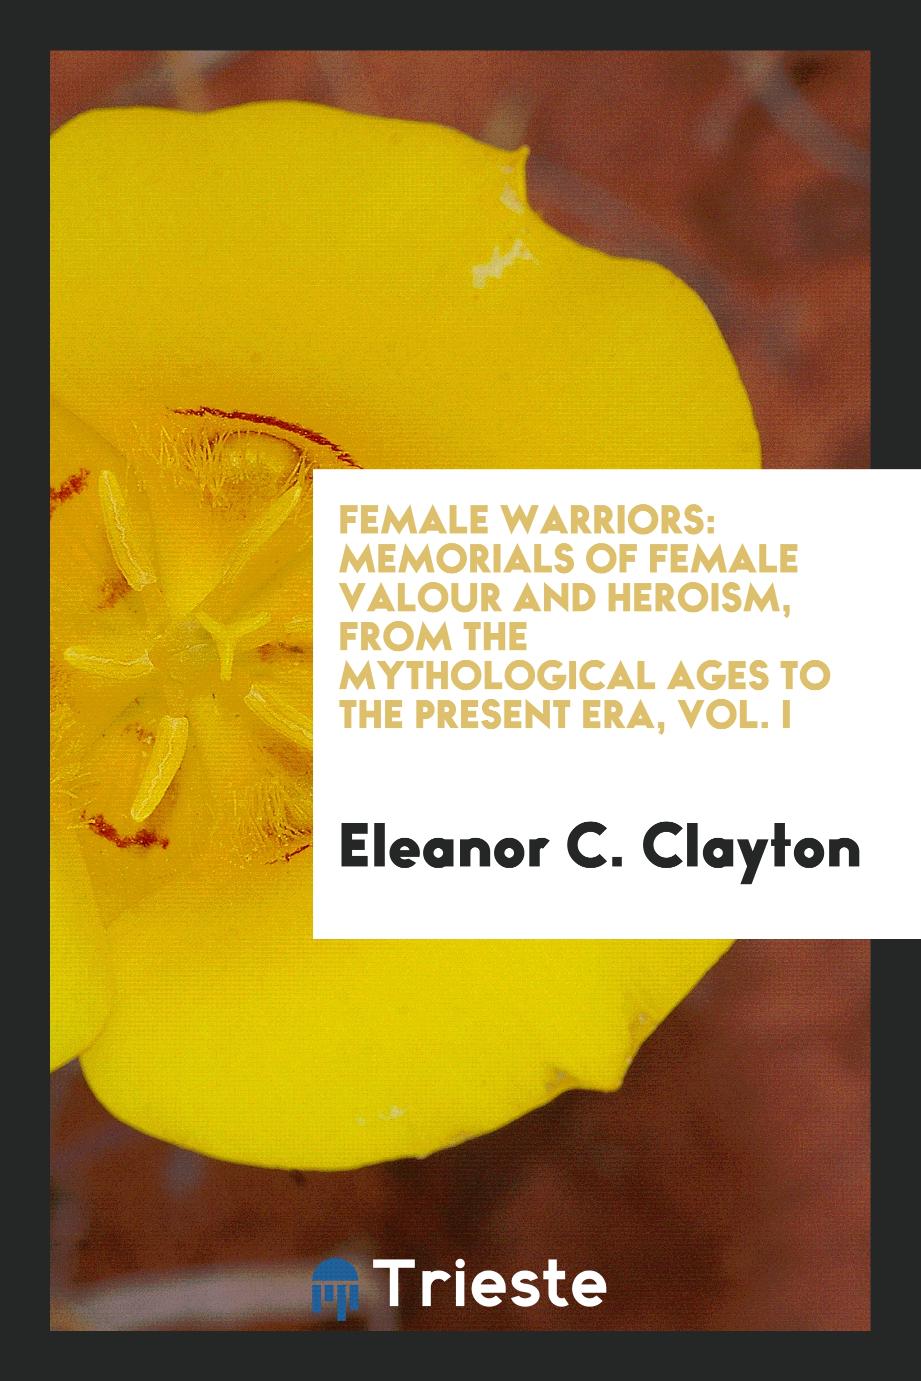 Female Warriors: Memorials of Female Valour and Heroism, from the Mythological Ages to the Present Era, Vol. I